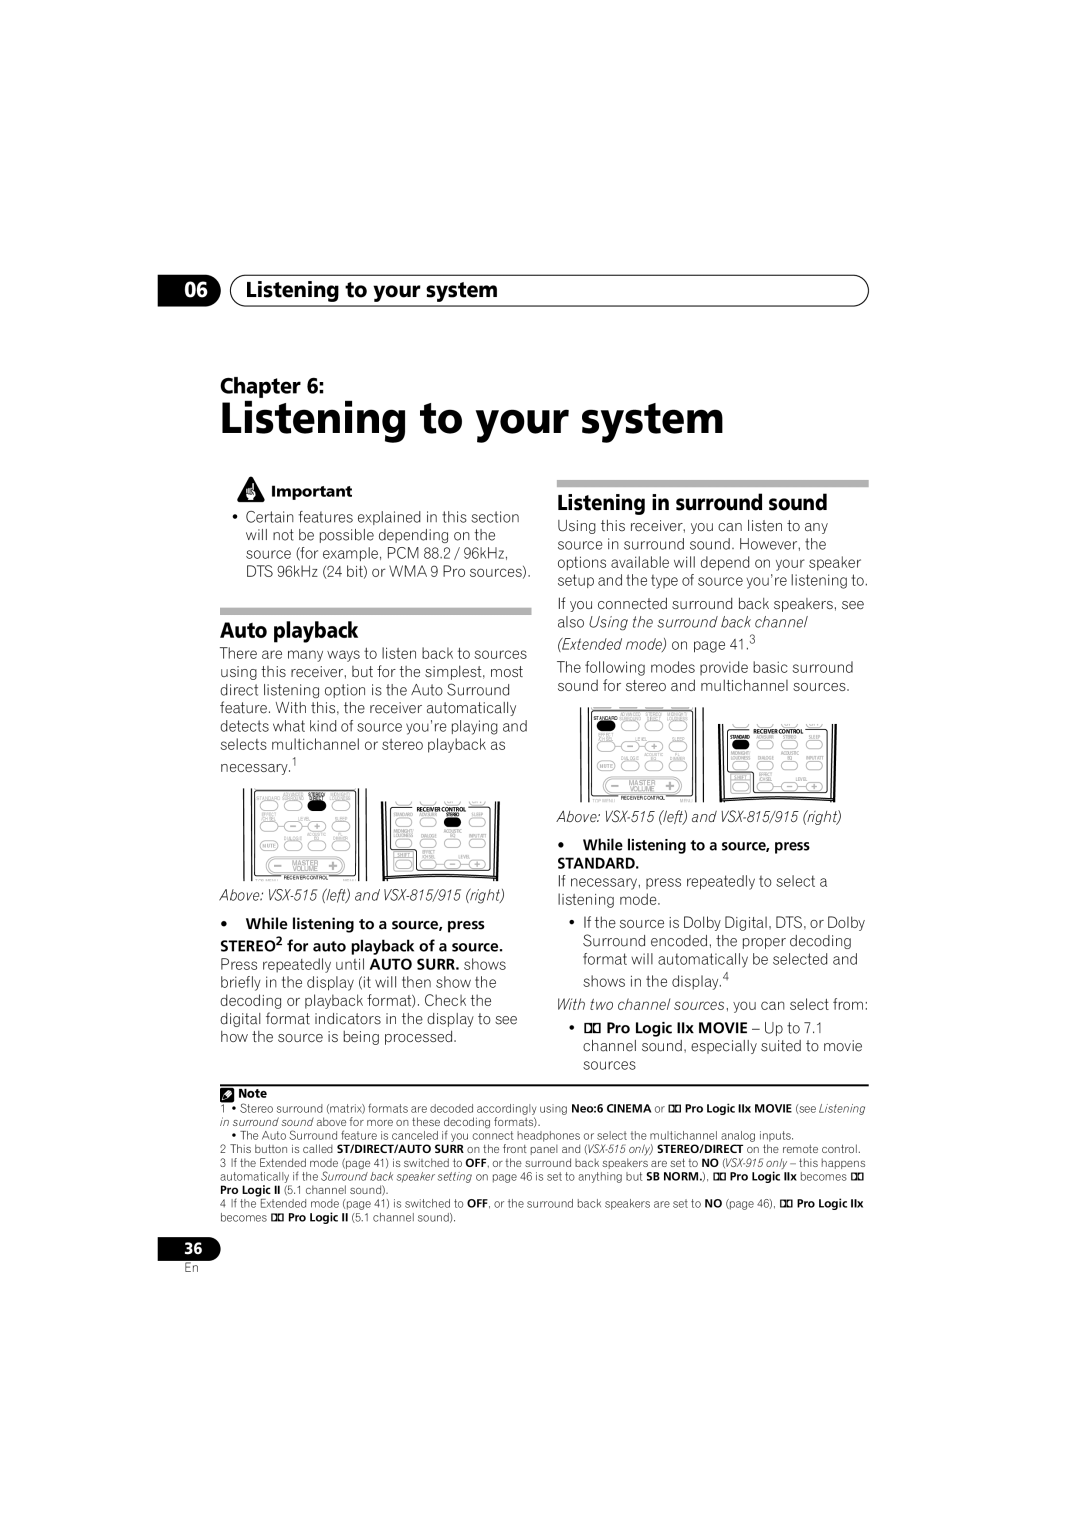 Pioneer VSX-915-S/-K, VSX-815-S/-K manual 06Listening to your system Chapter, Auto playback, Listening in surround sound 